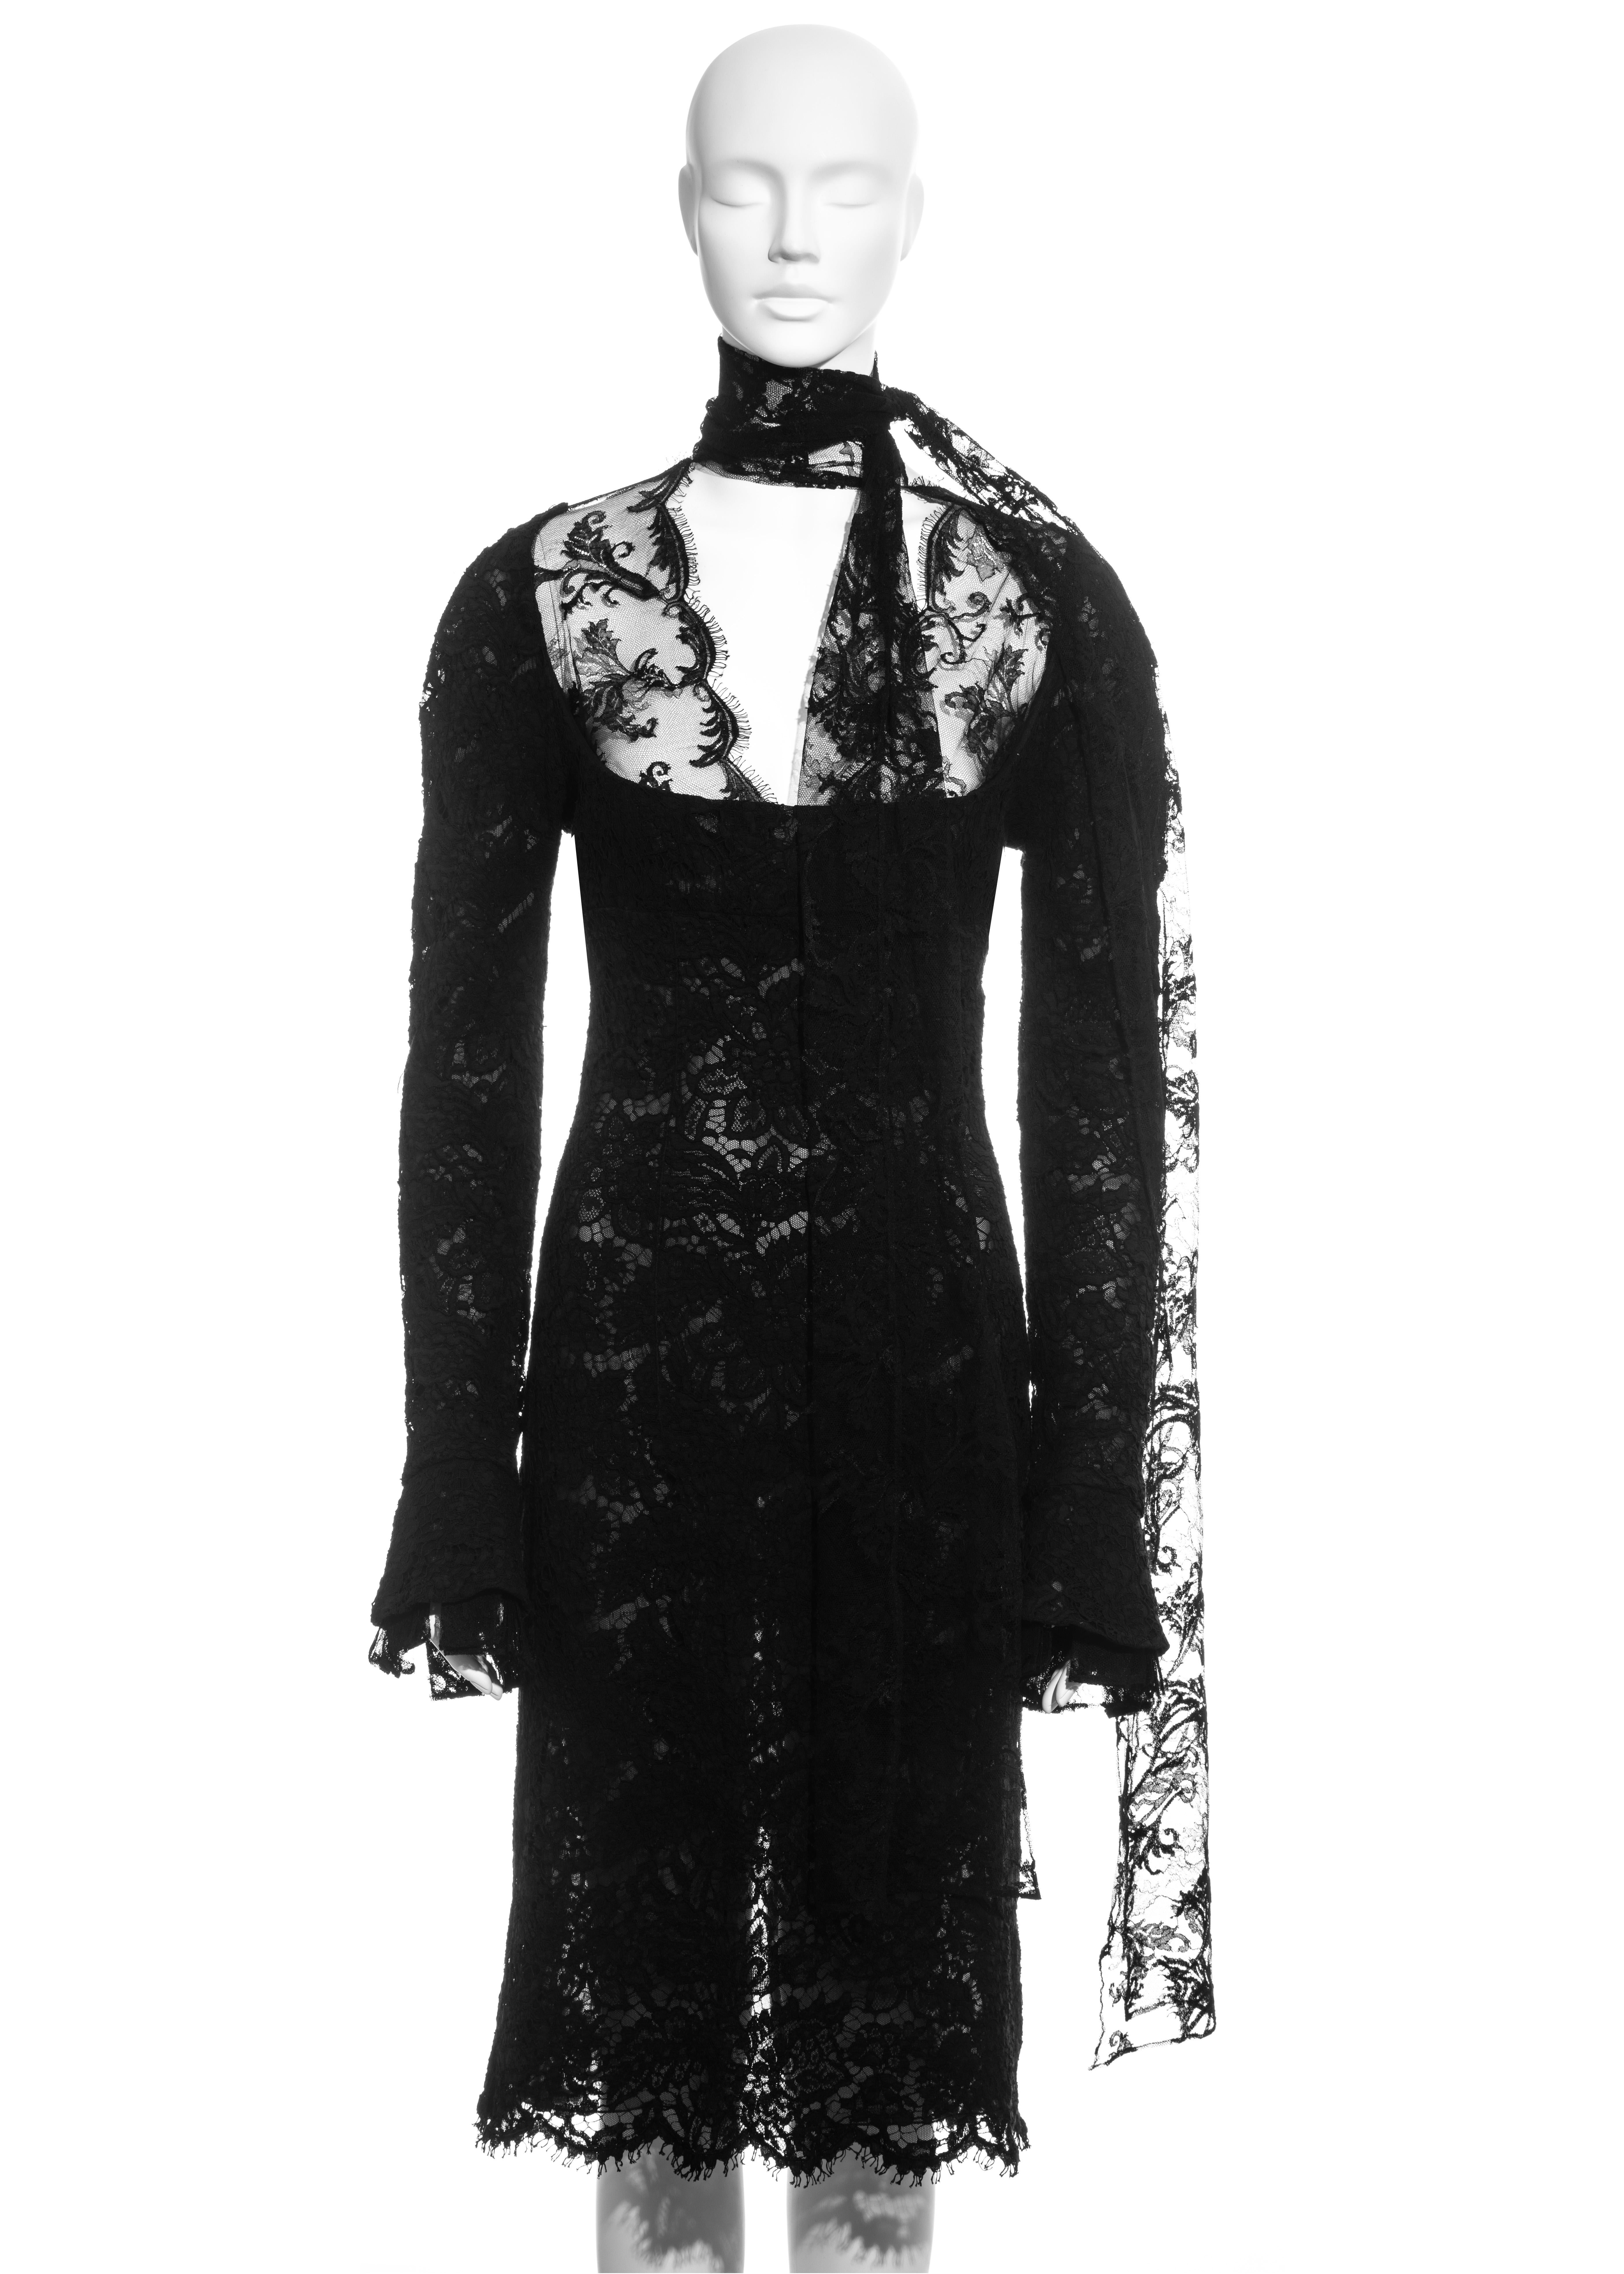 Yves Saint Laurent by Tom Ford black lace long-sleeve evening dress, fw 2002